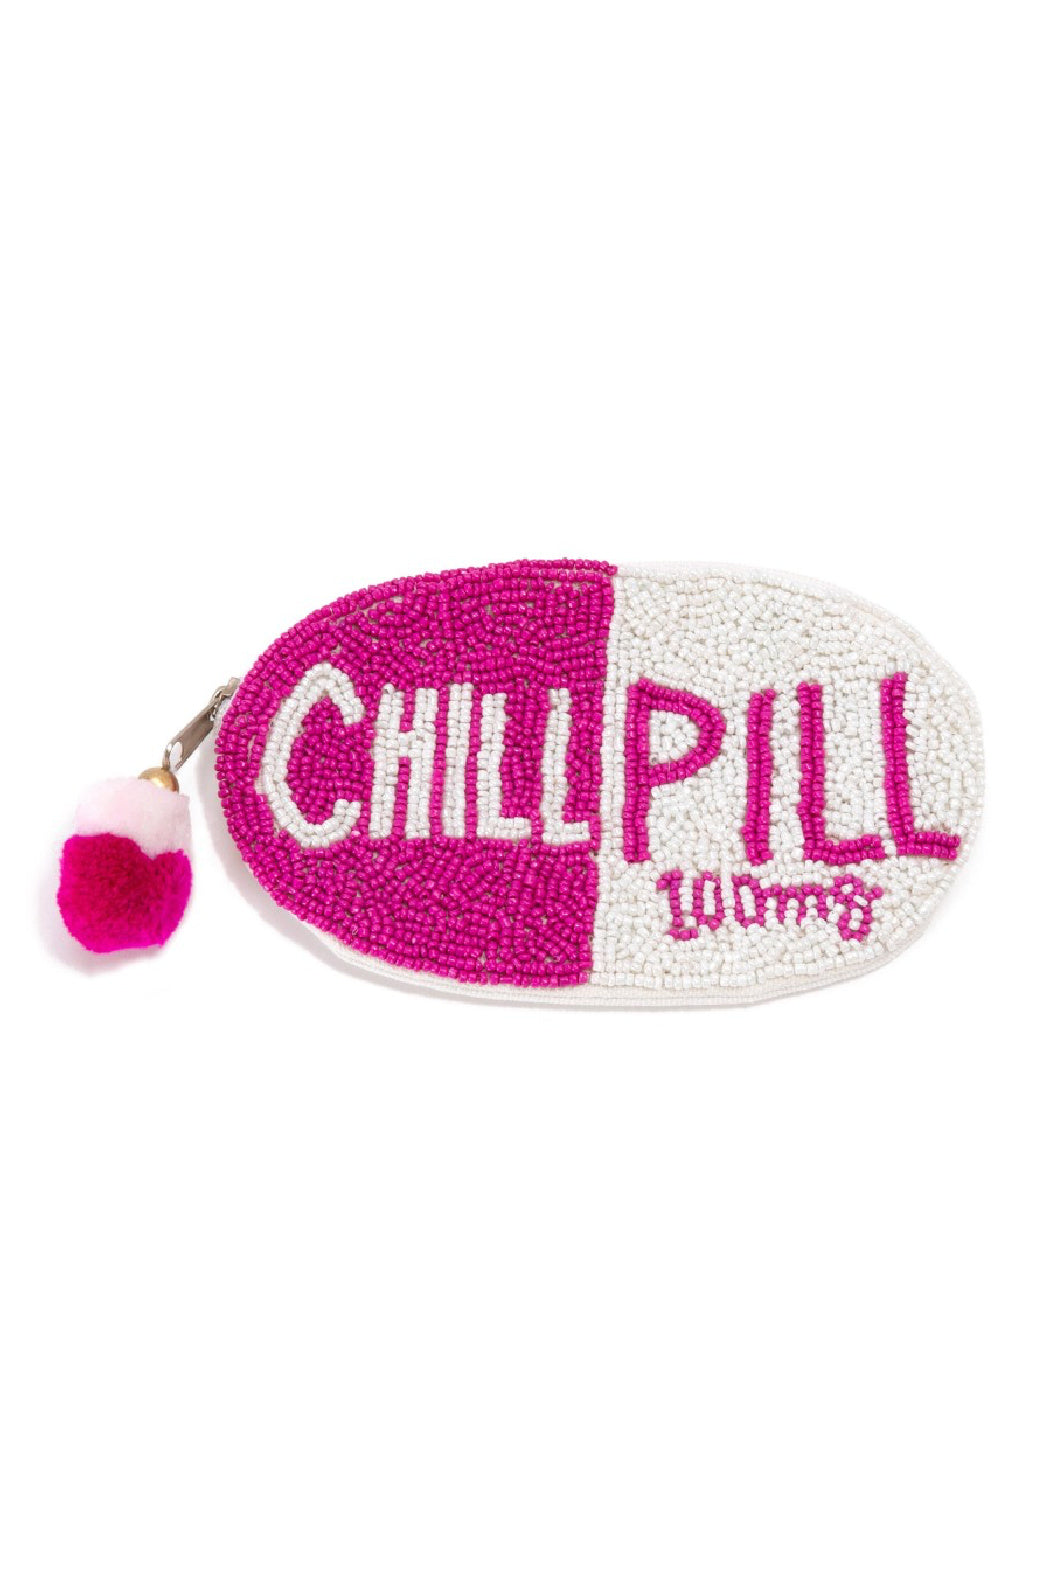 Chill Pill Beaded Pouch Bag